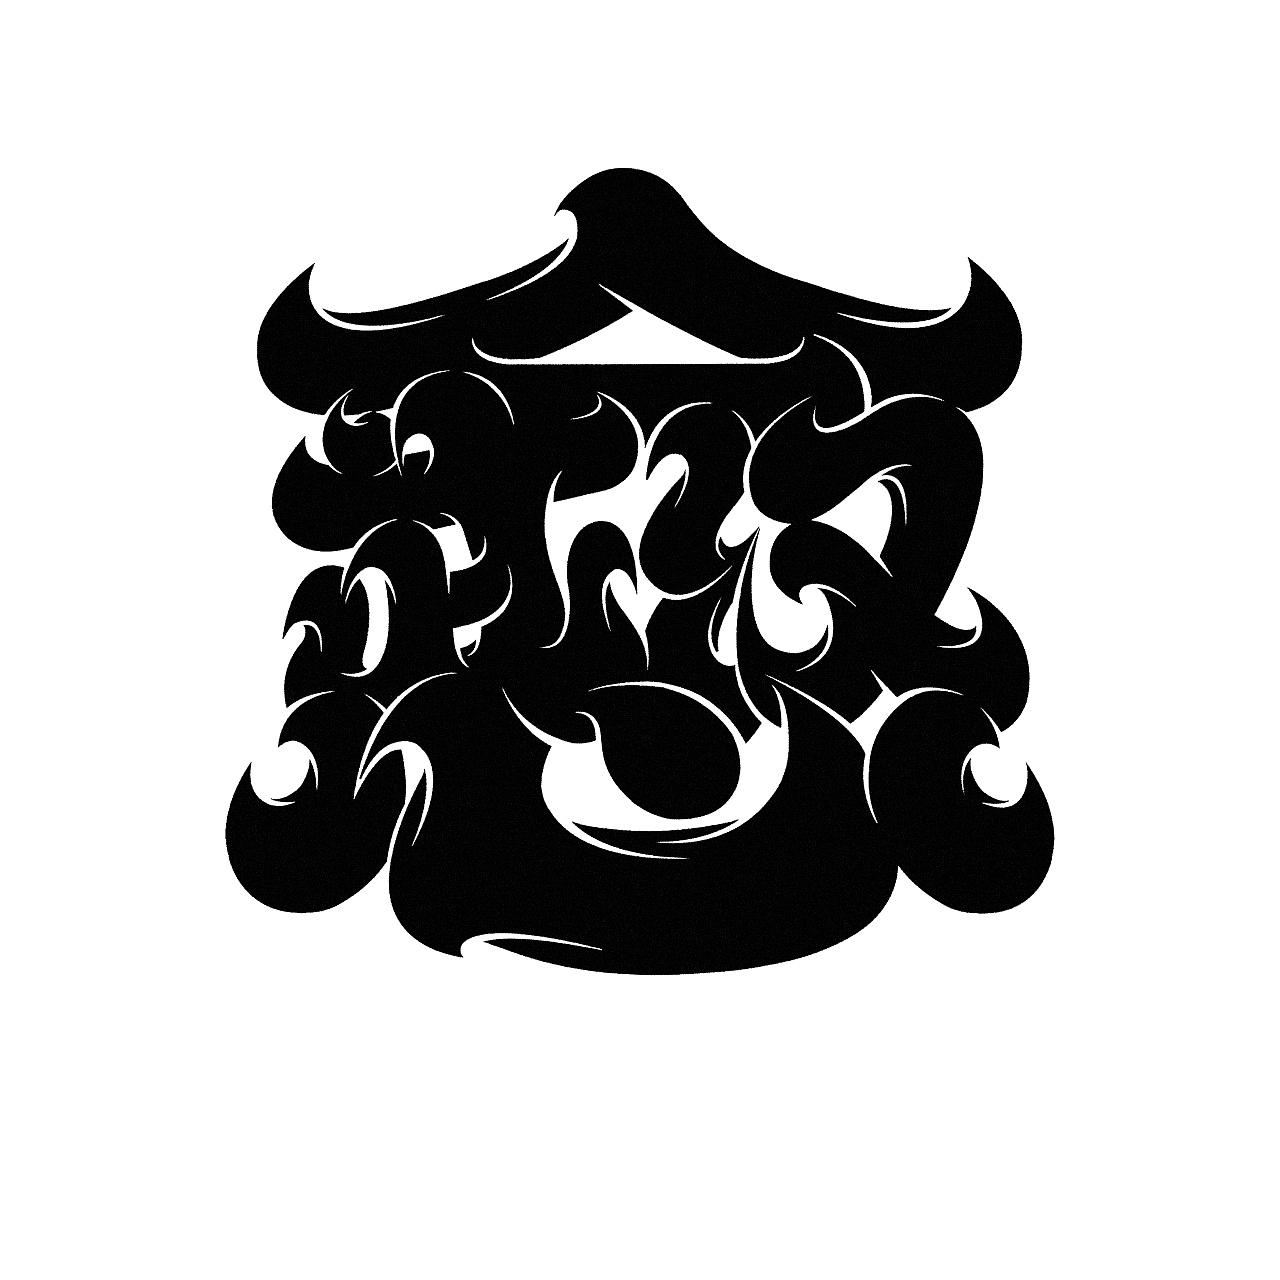 Chinese Creative Font Design-Taihu lake glyph, made this period of time I want to express a few words